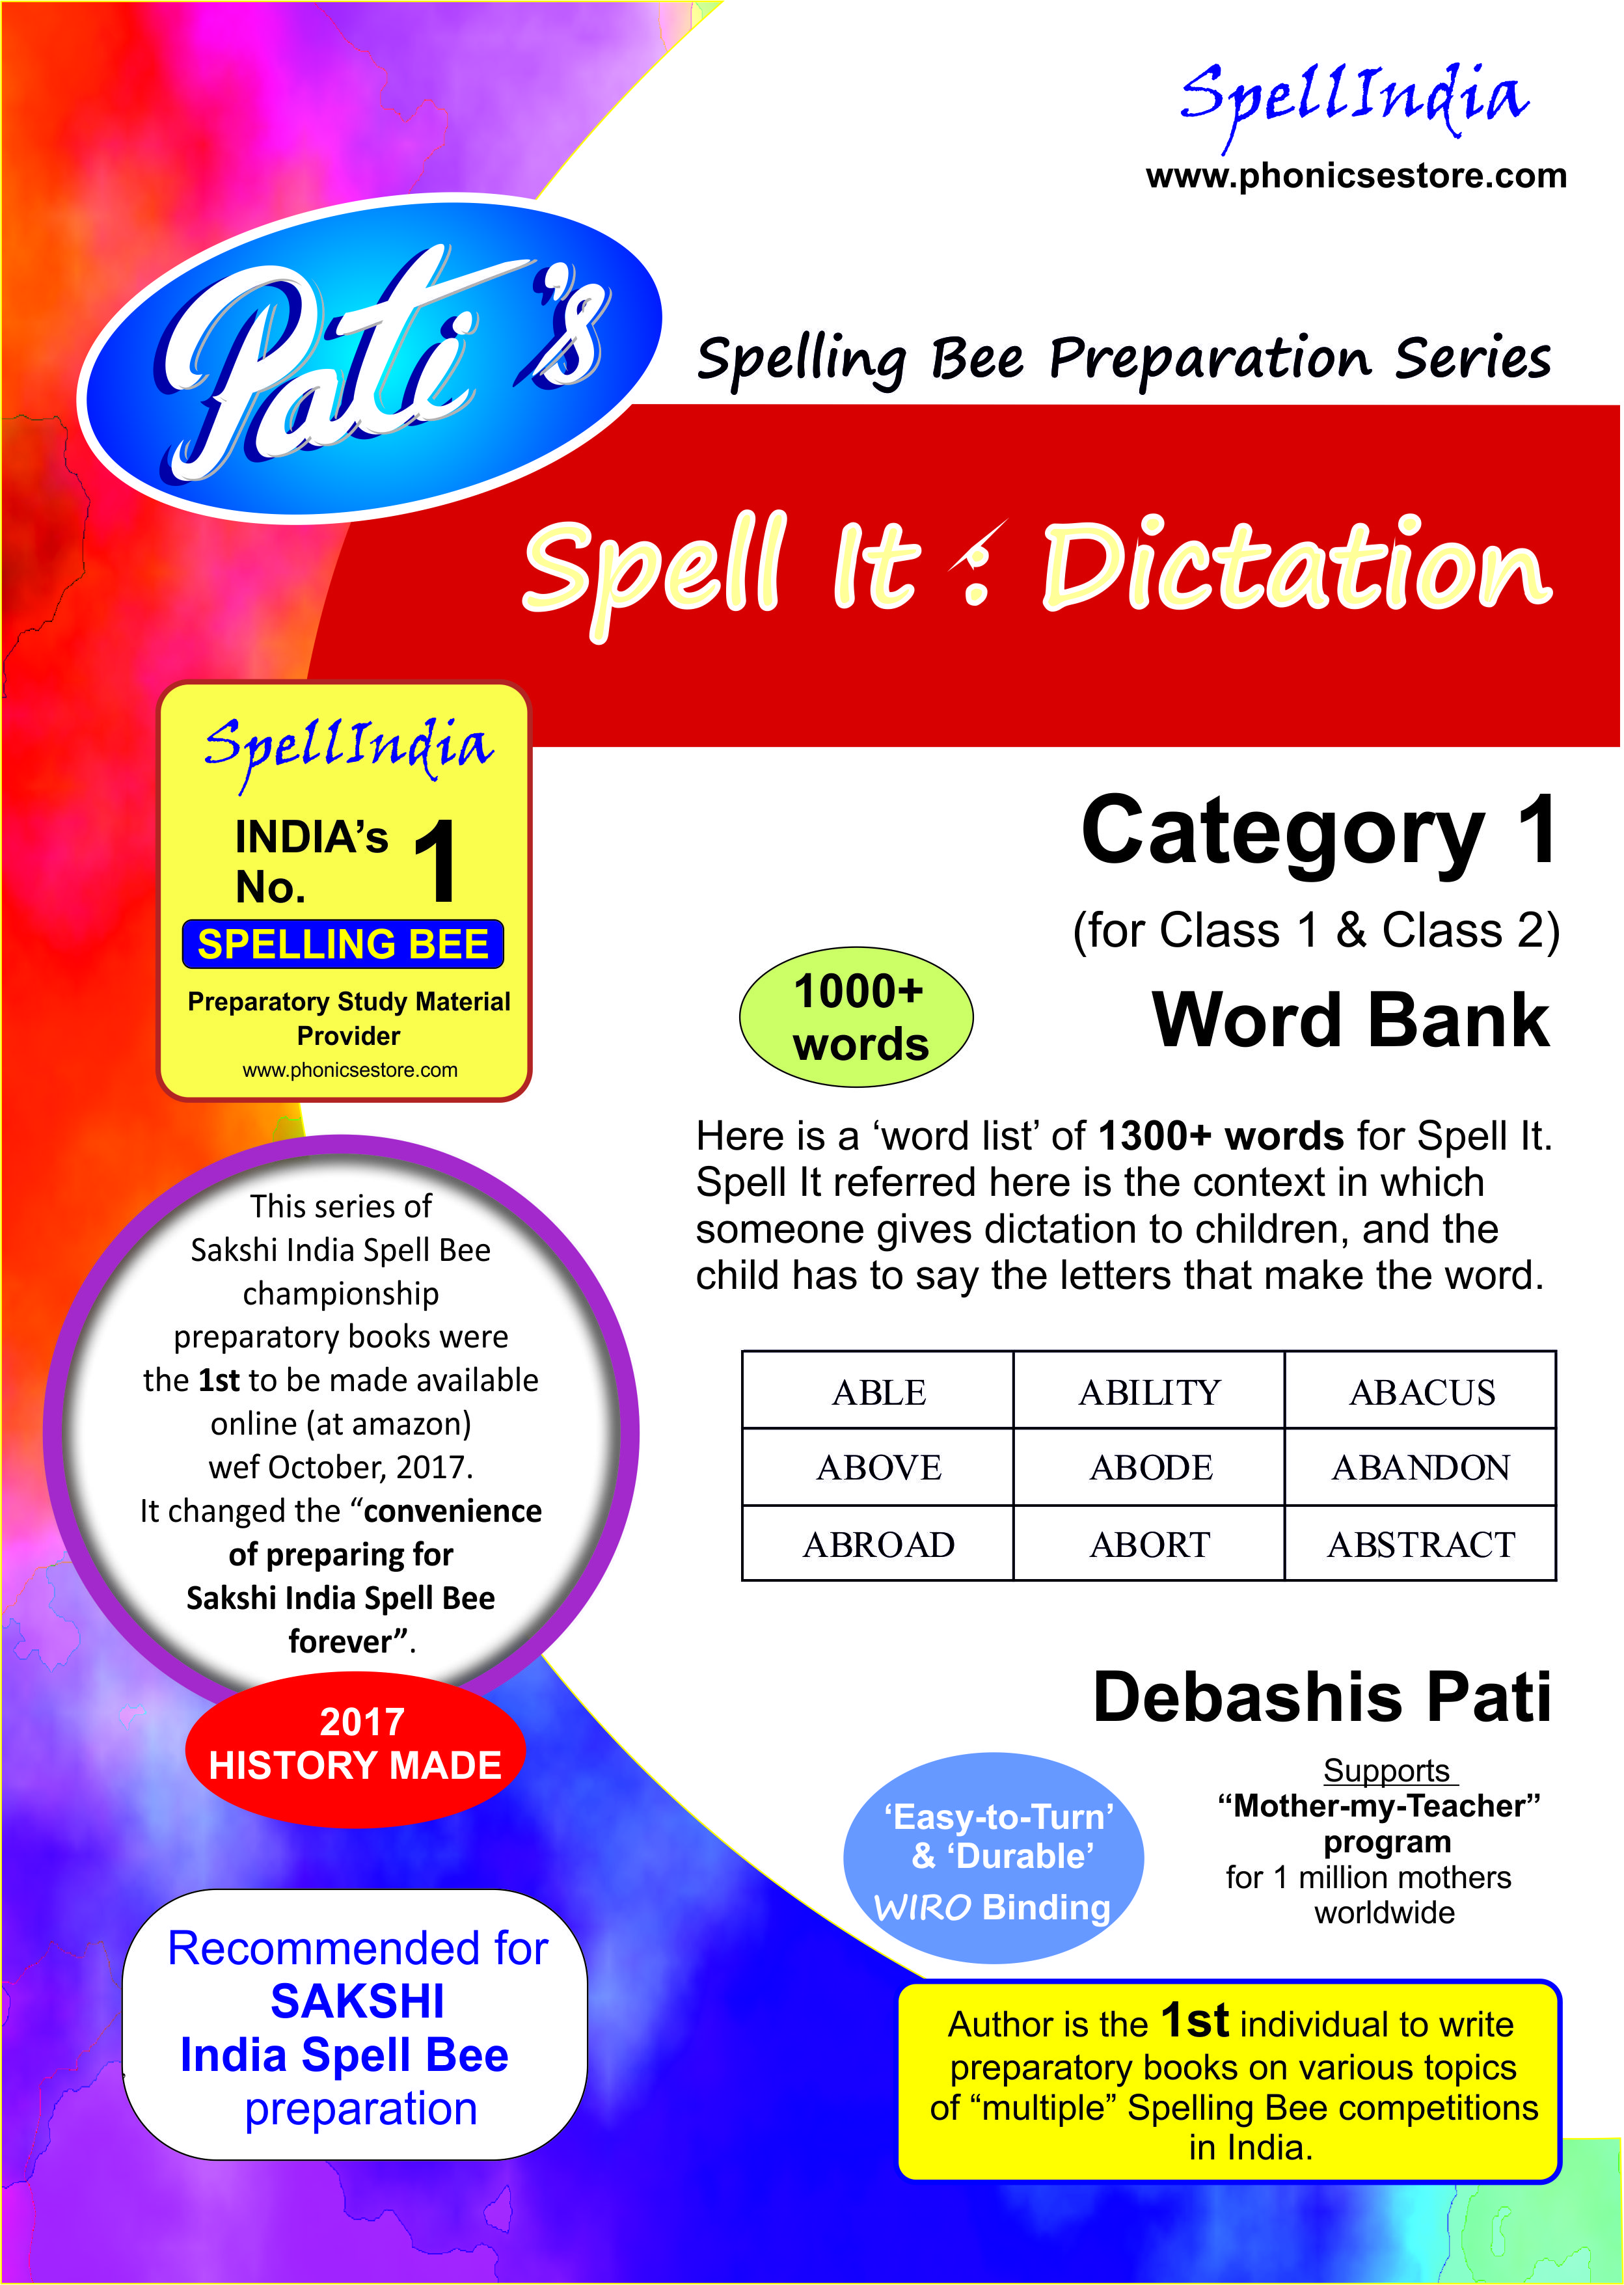 INDIA SPELL BEE SAKSHI CATEGORY 1 CLASS 1 2